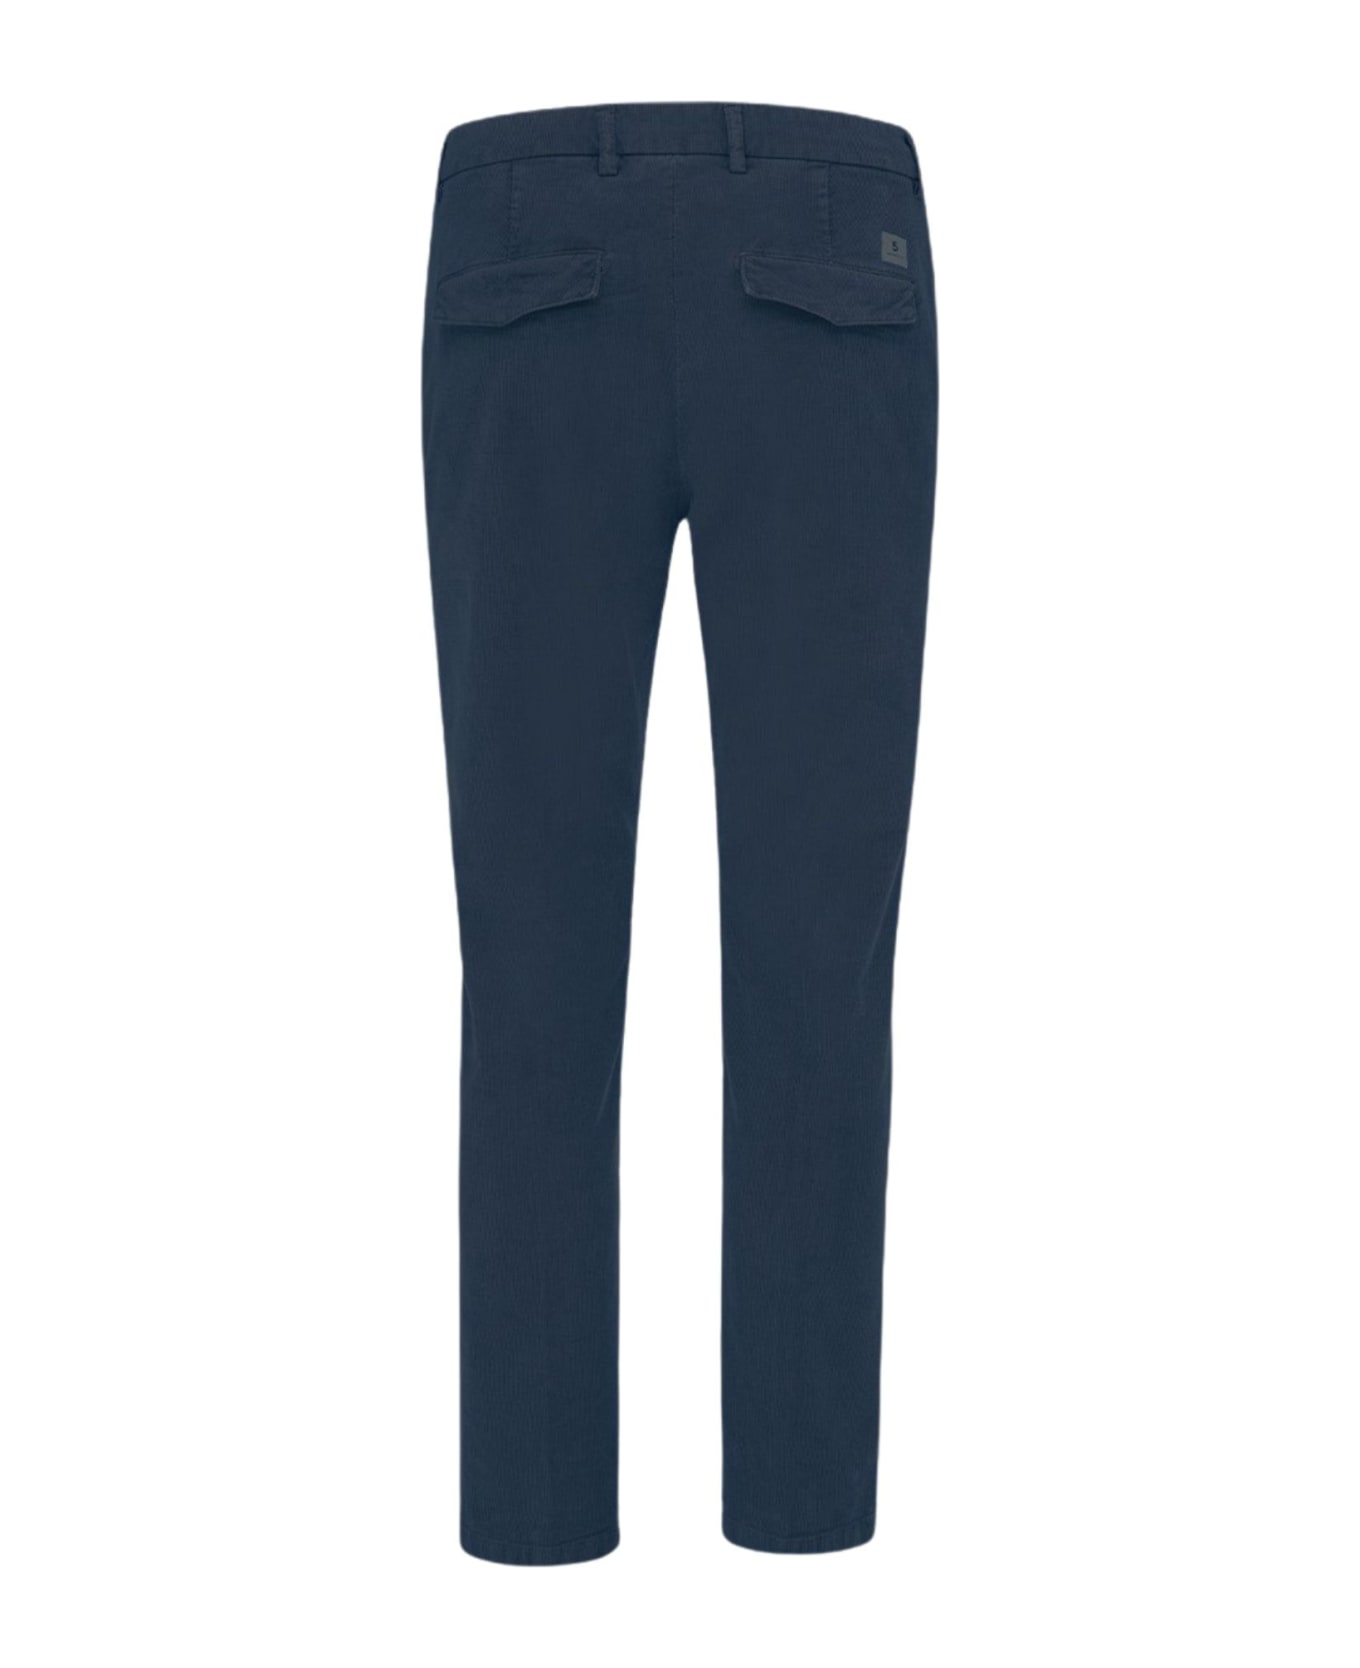 Department Five Prince Pences Chinos - Navy